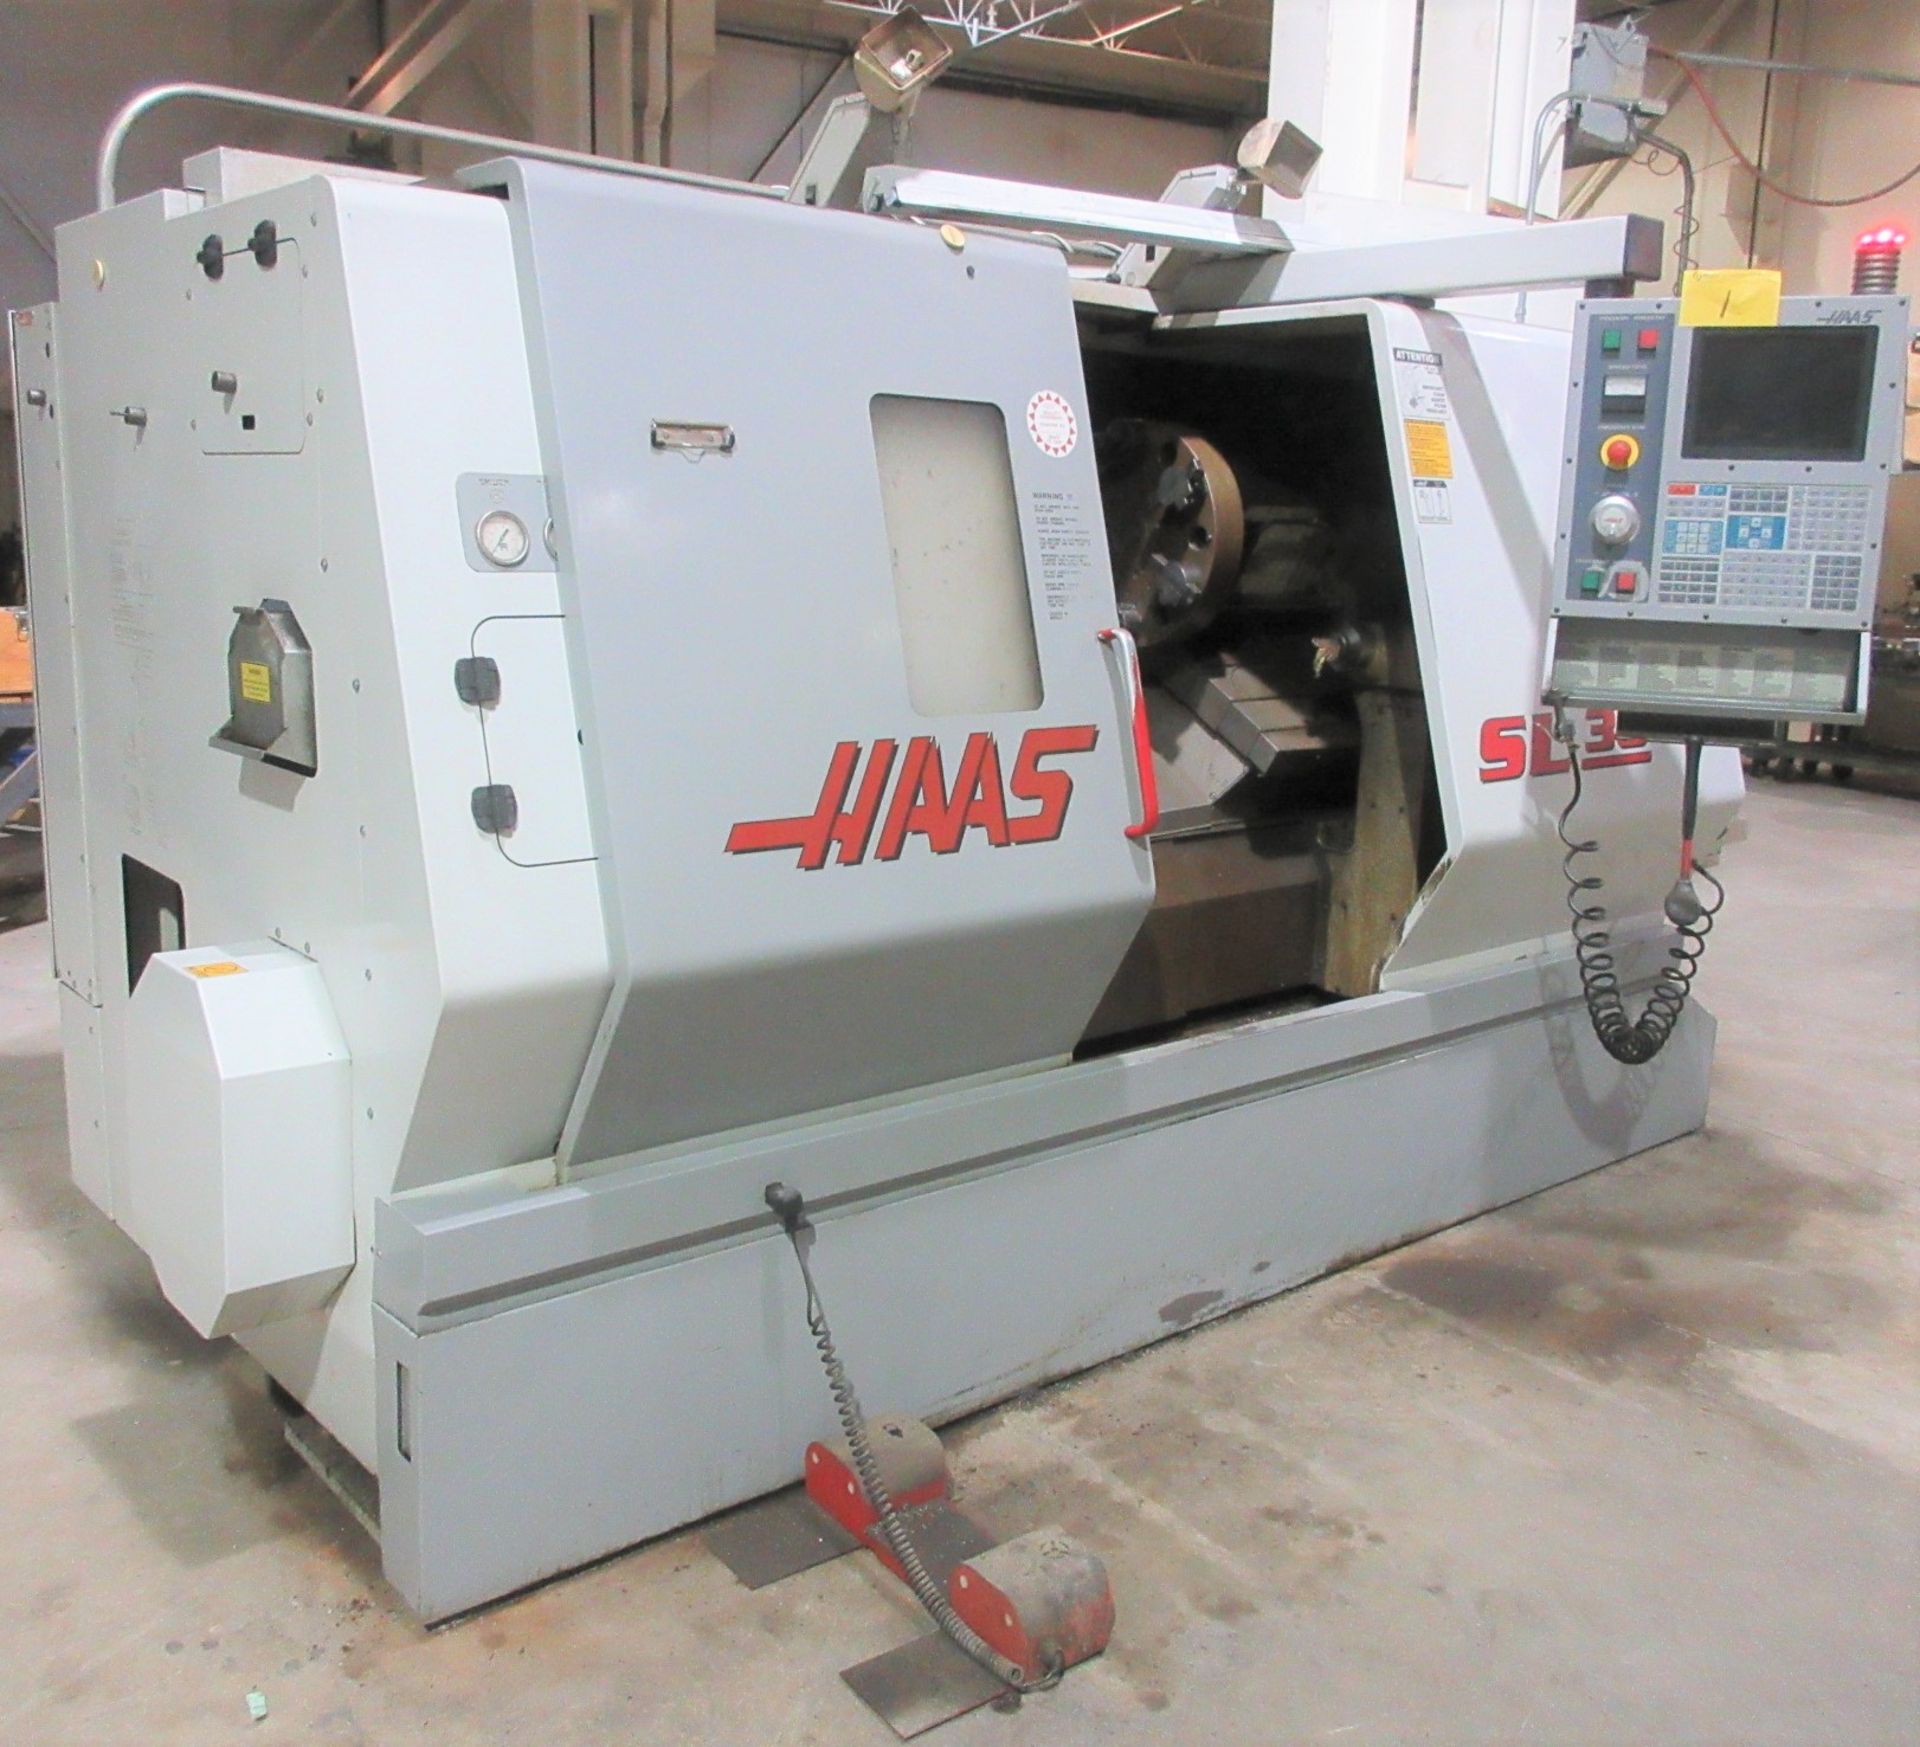 2002 HAAS SL-30T CNC LATHE, S/N 64801, CNC CONTROL, 10” 3-JAW CHUCK, TOOL PRESETTER, 12-STATION - Image 2 of 20